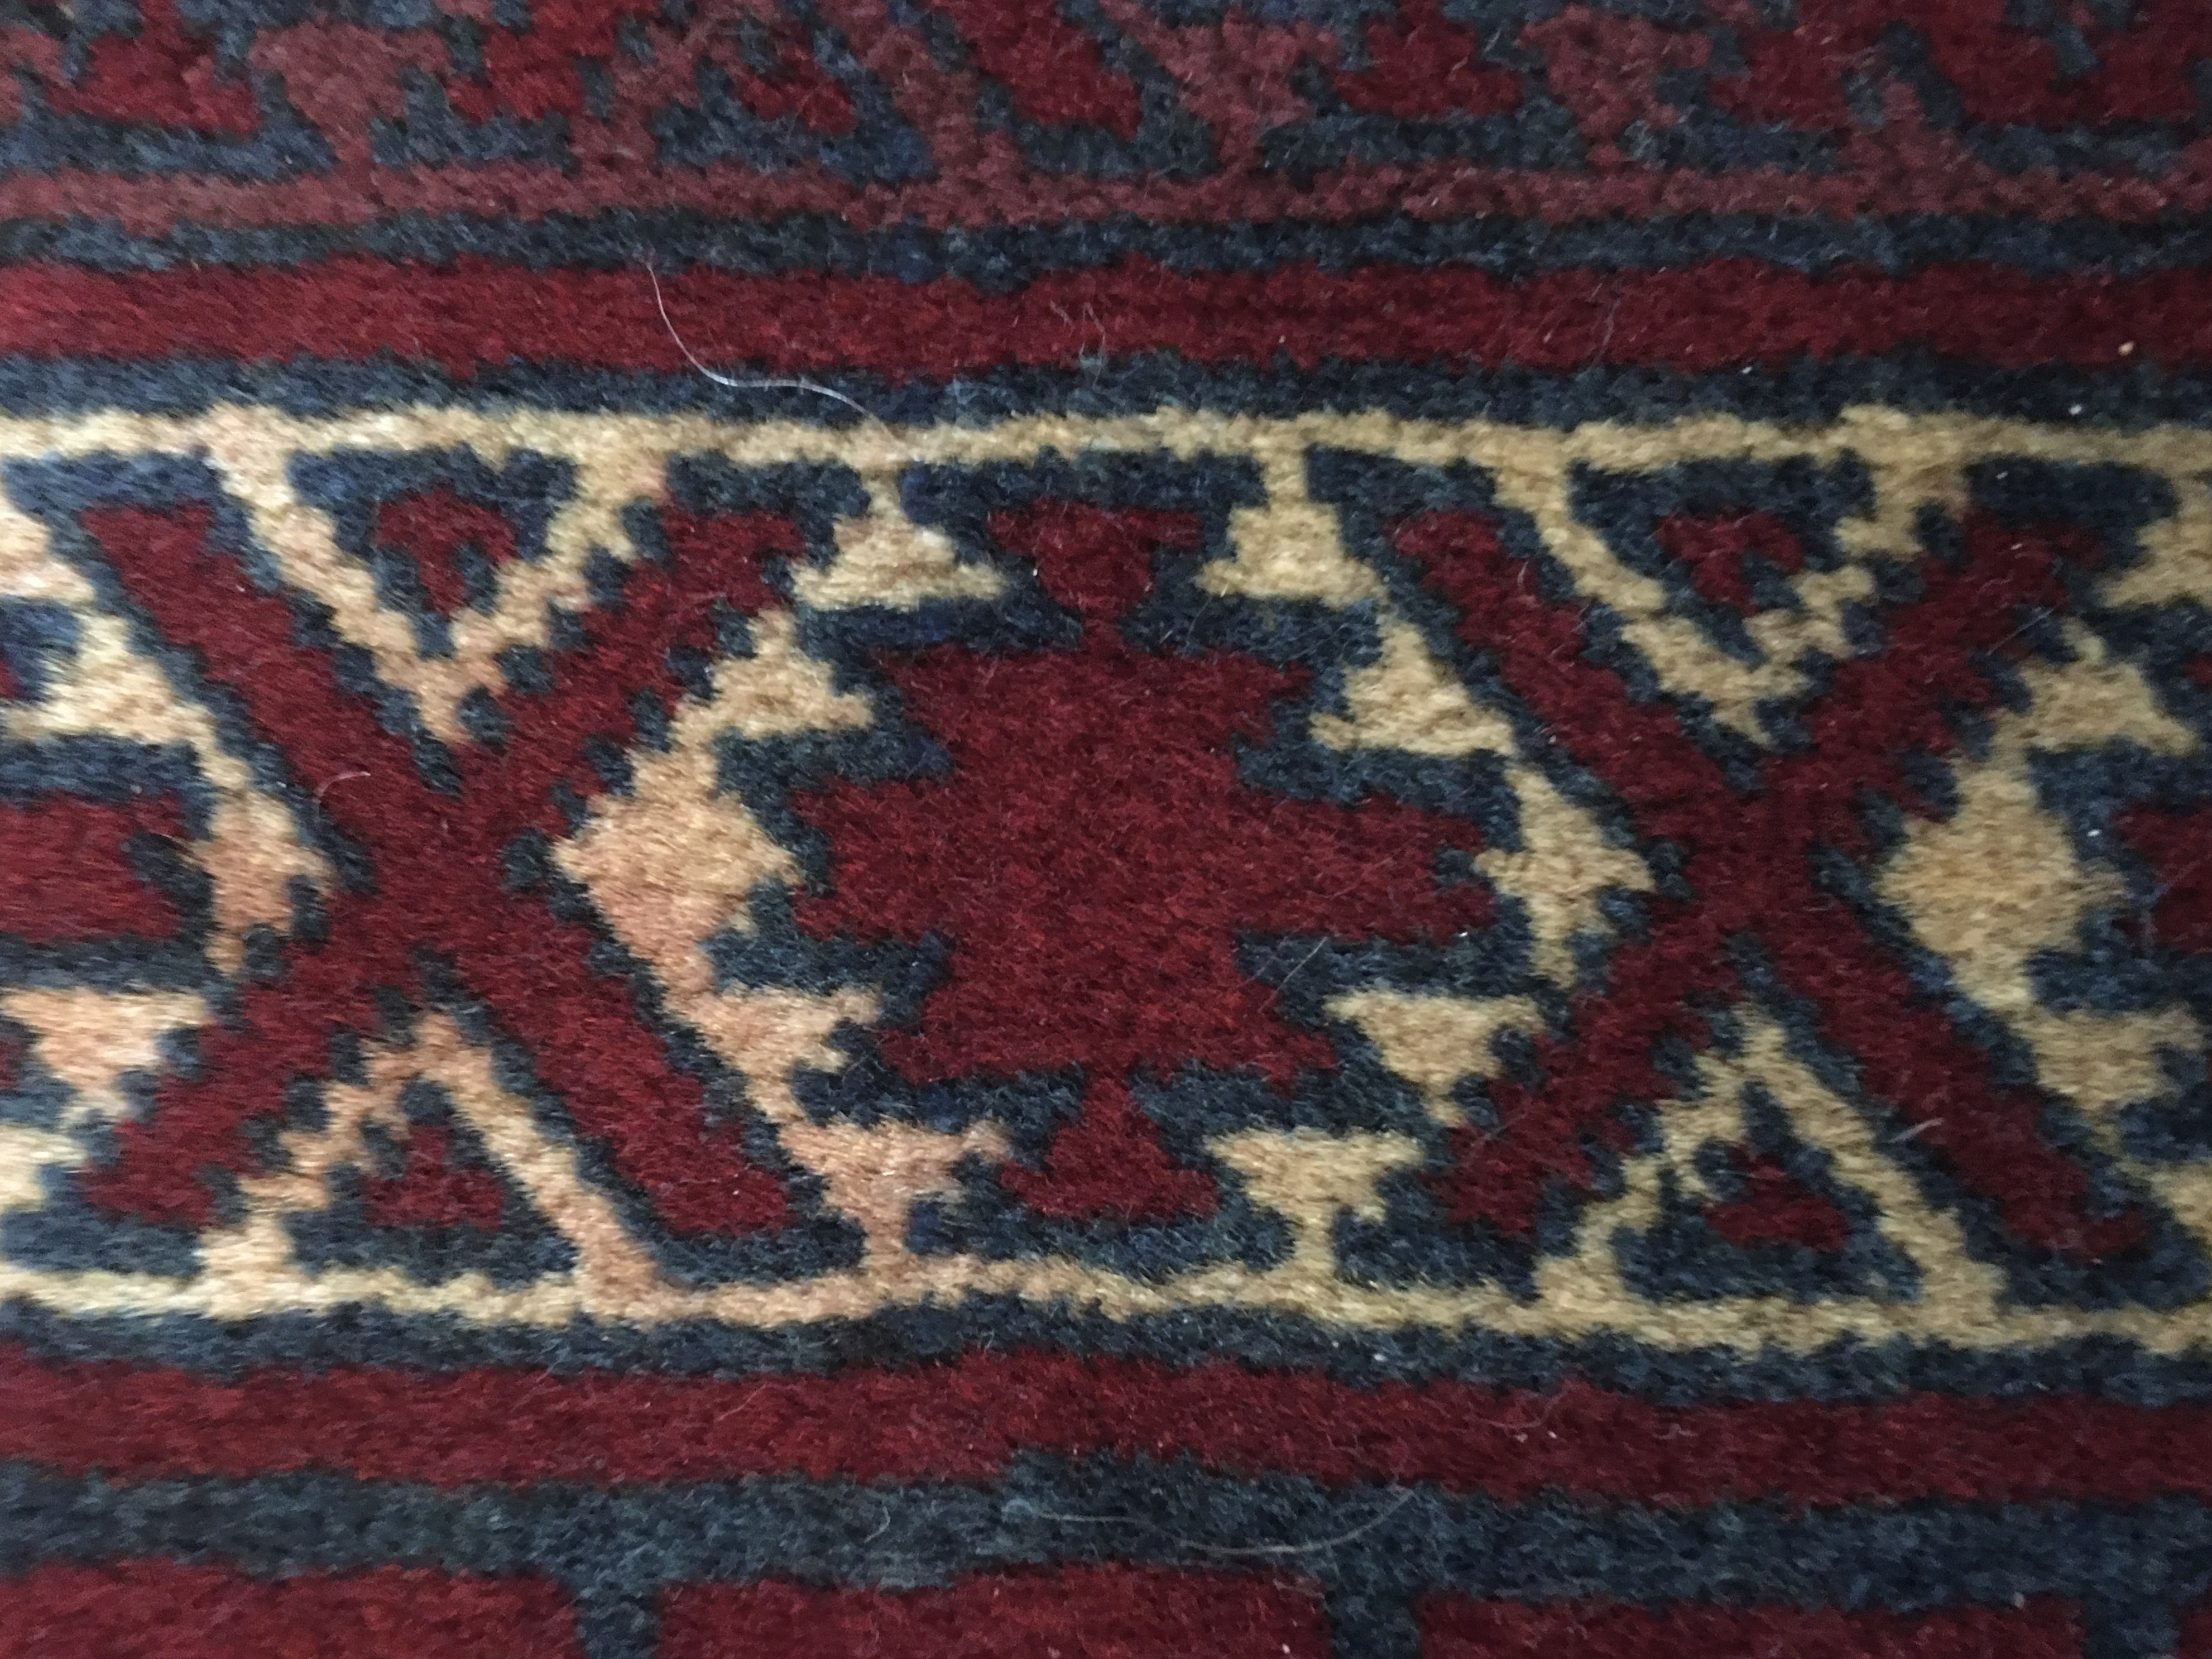 Detail of rug's border with some red dye bleeding into the white background